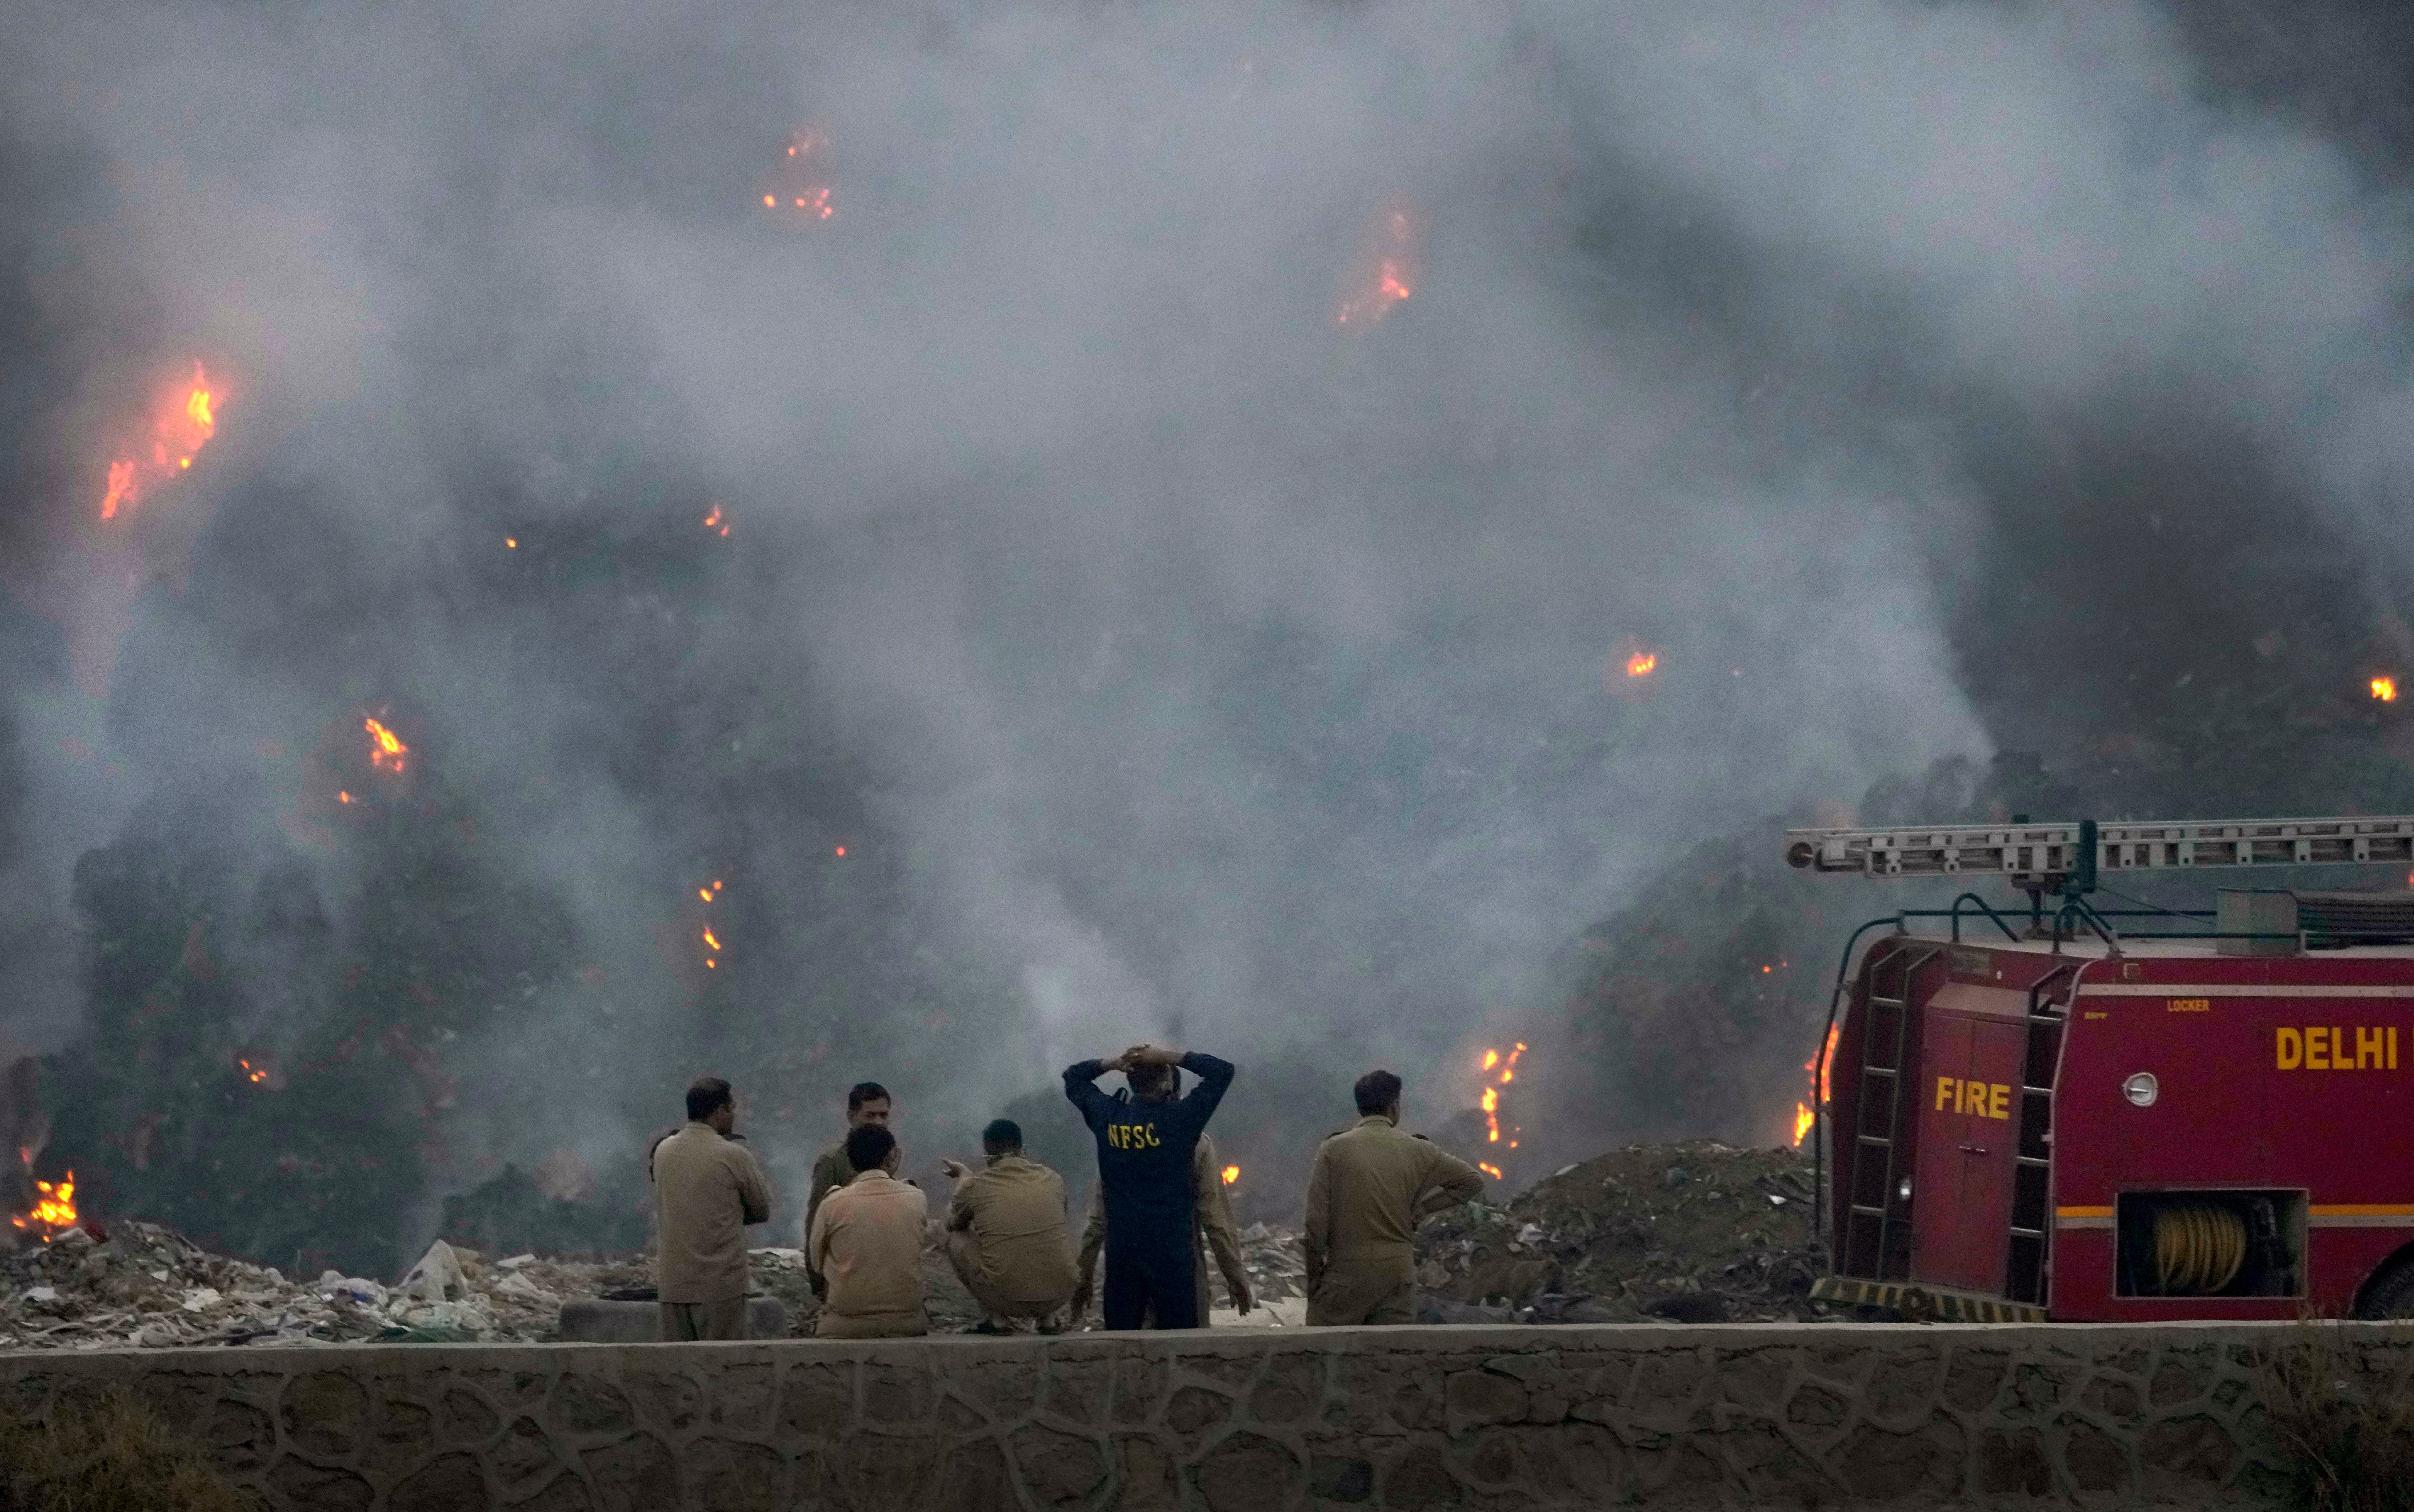 Fire officials look on. (Photo: Manish Swarup, AP)